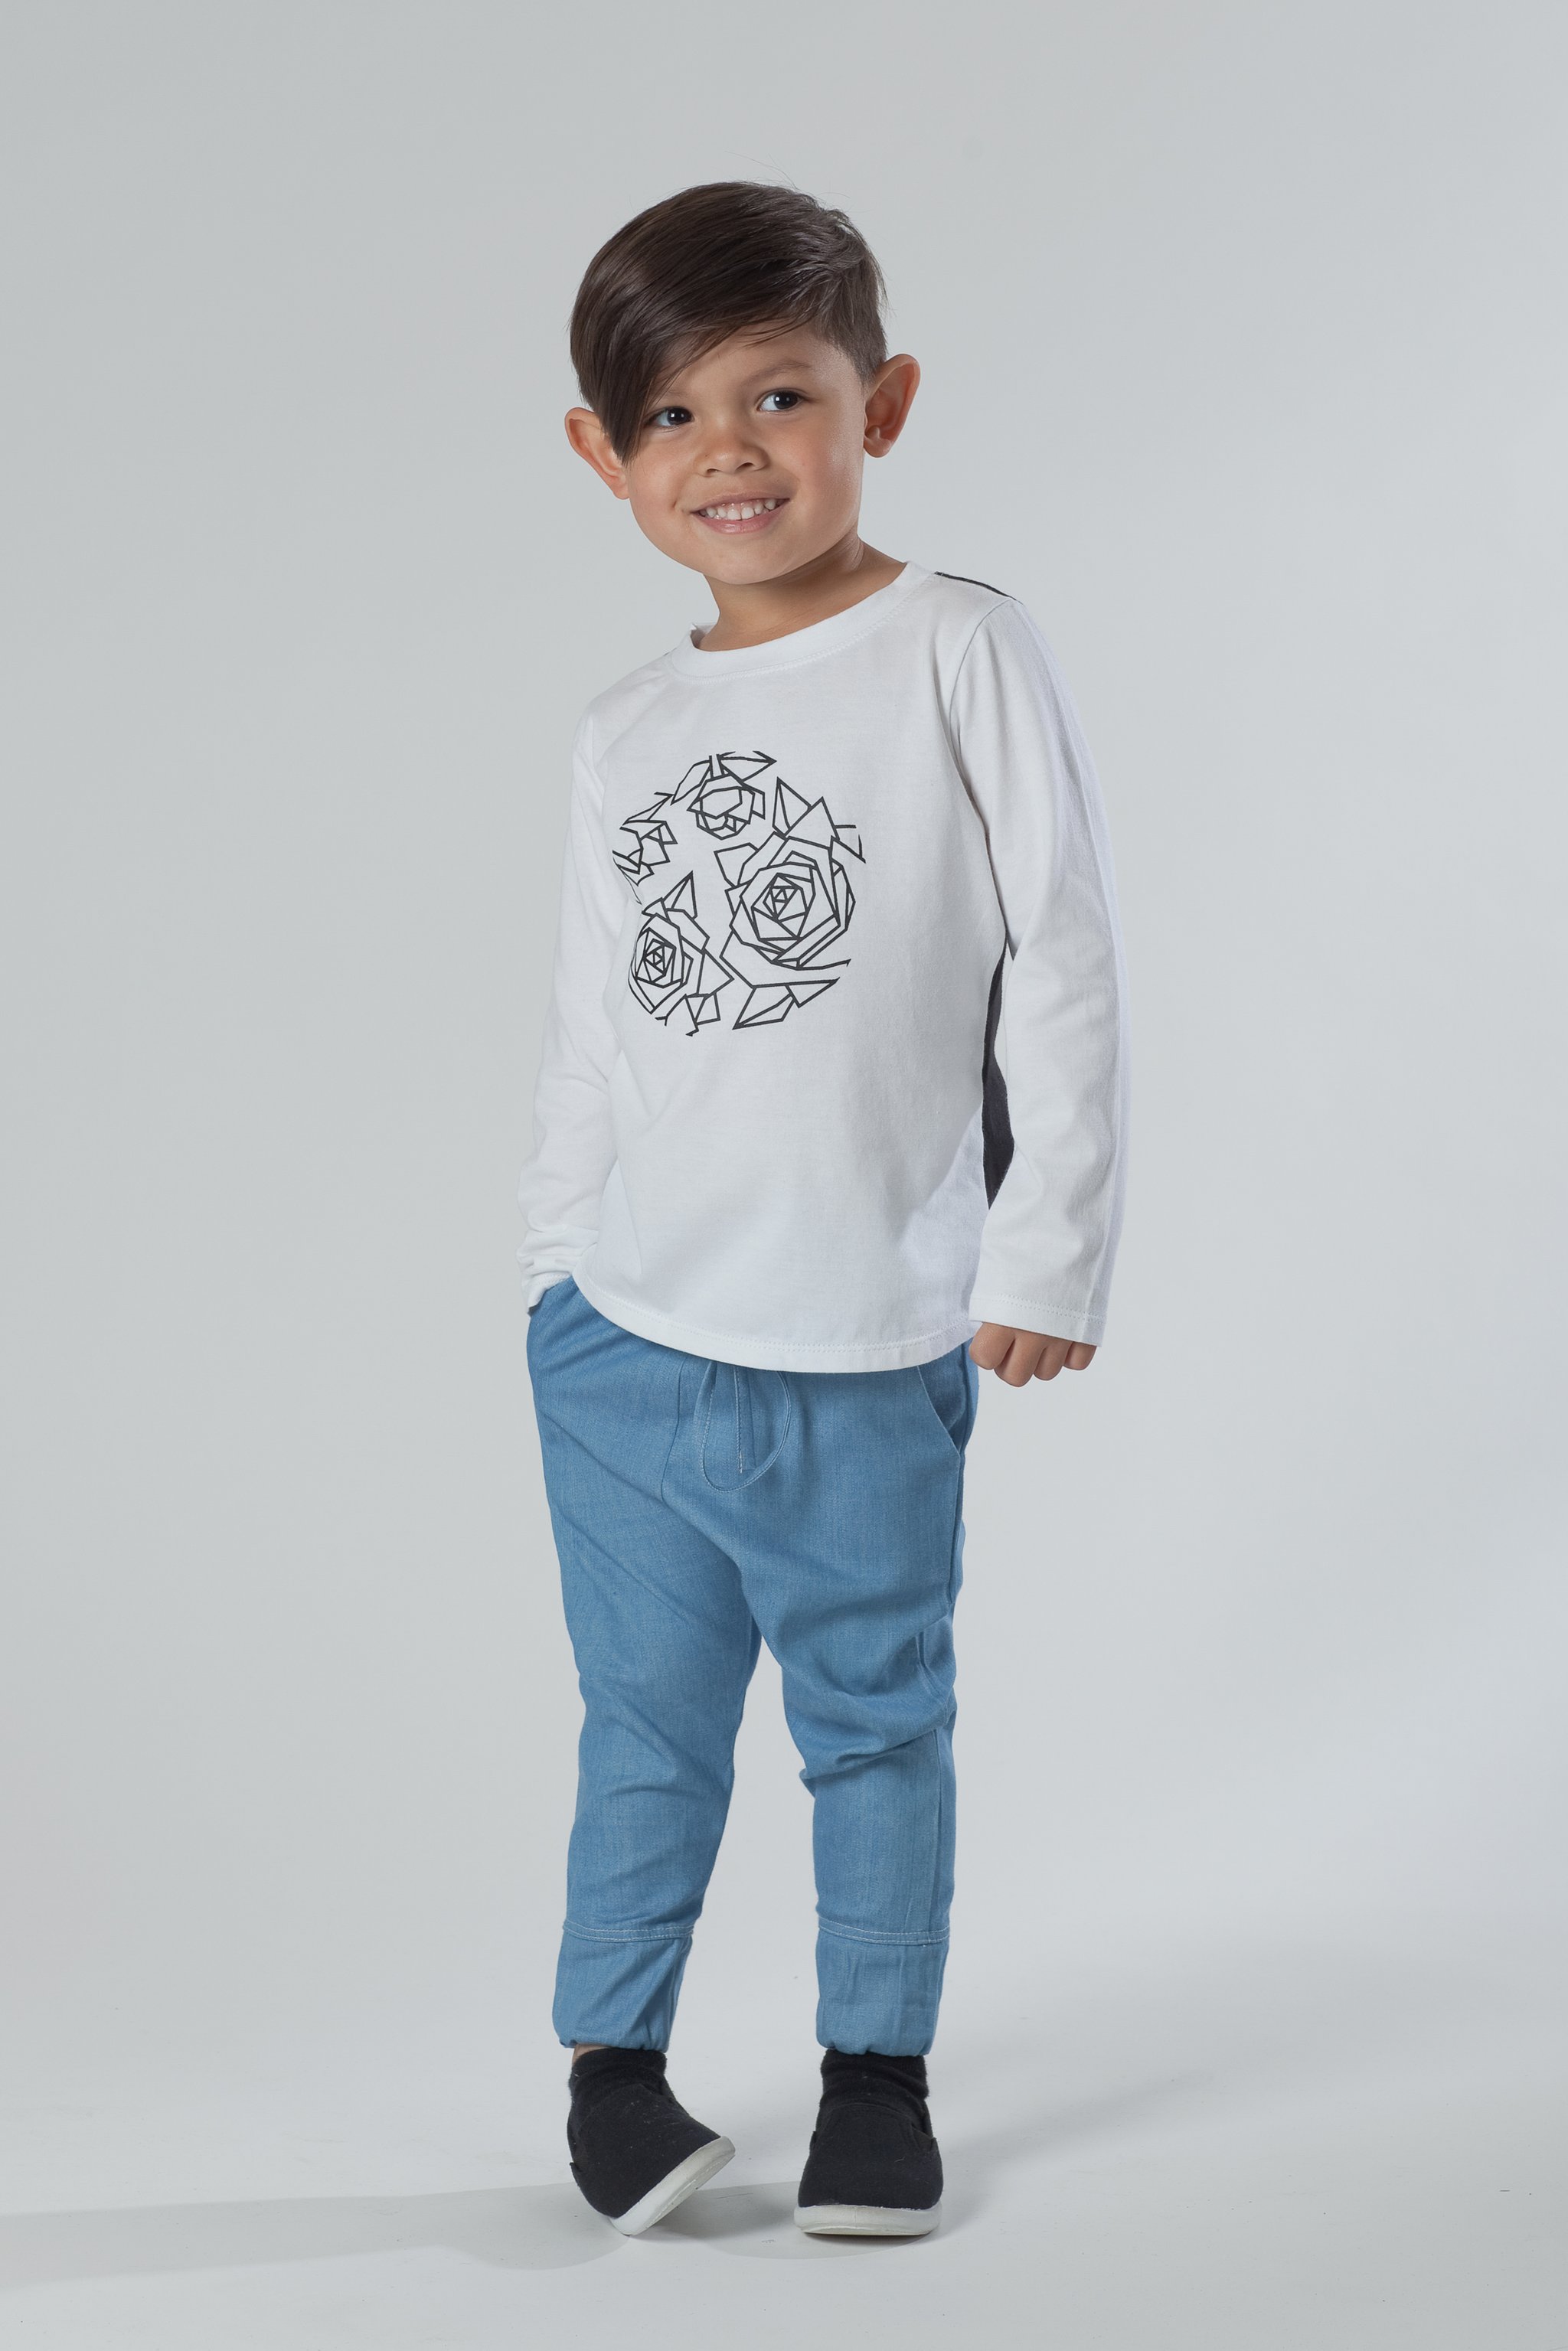 ReCreate Kids Clothing Designers That Are Sustainable and Fashionable